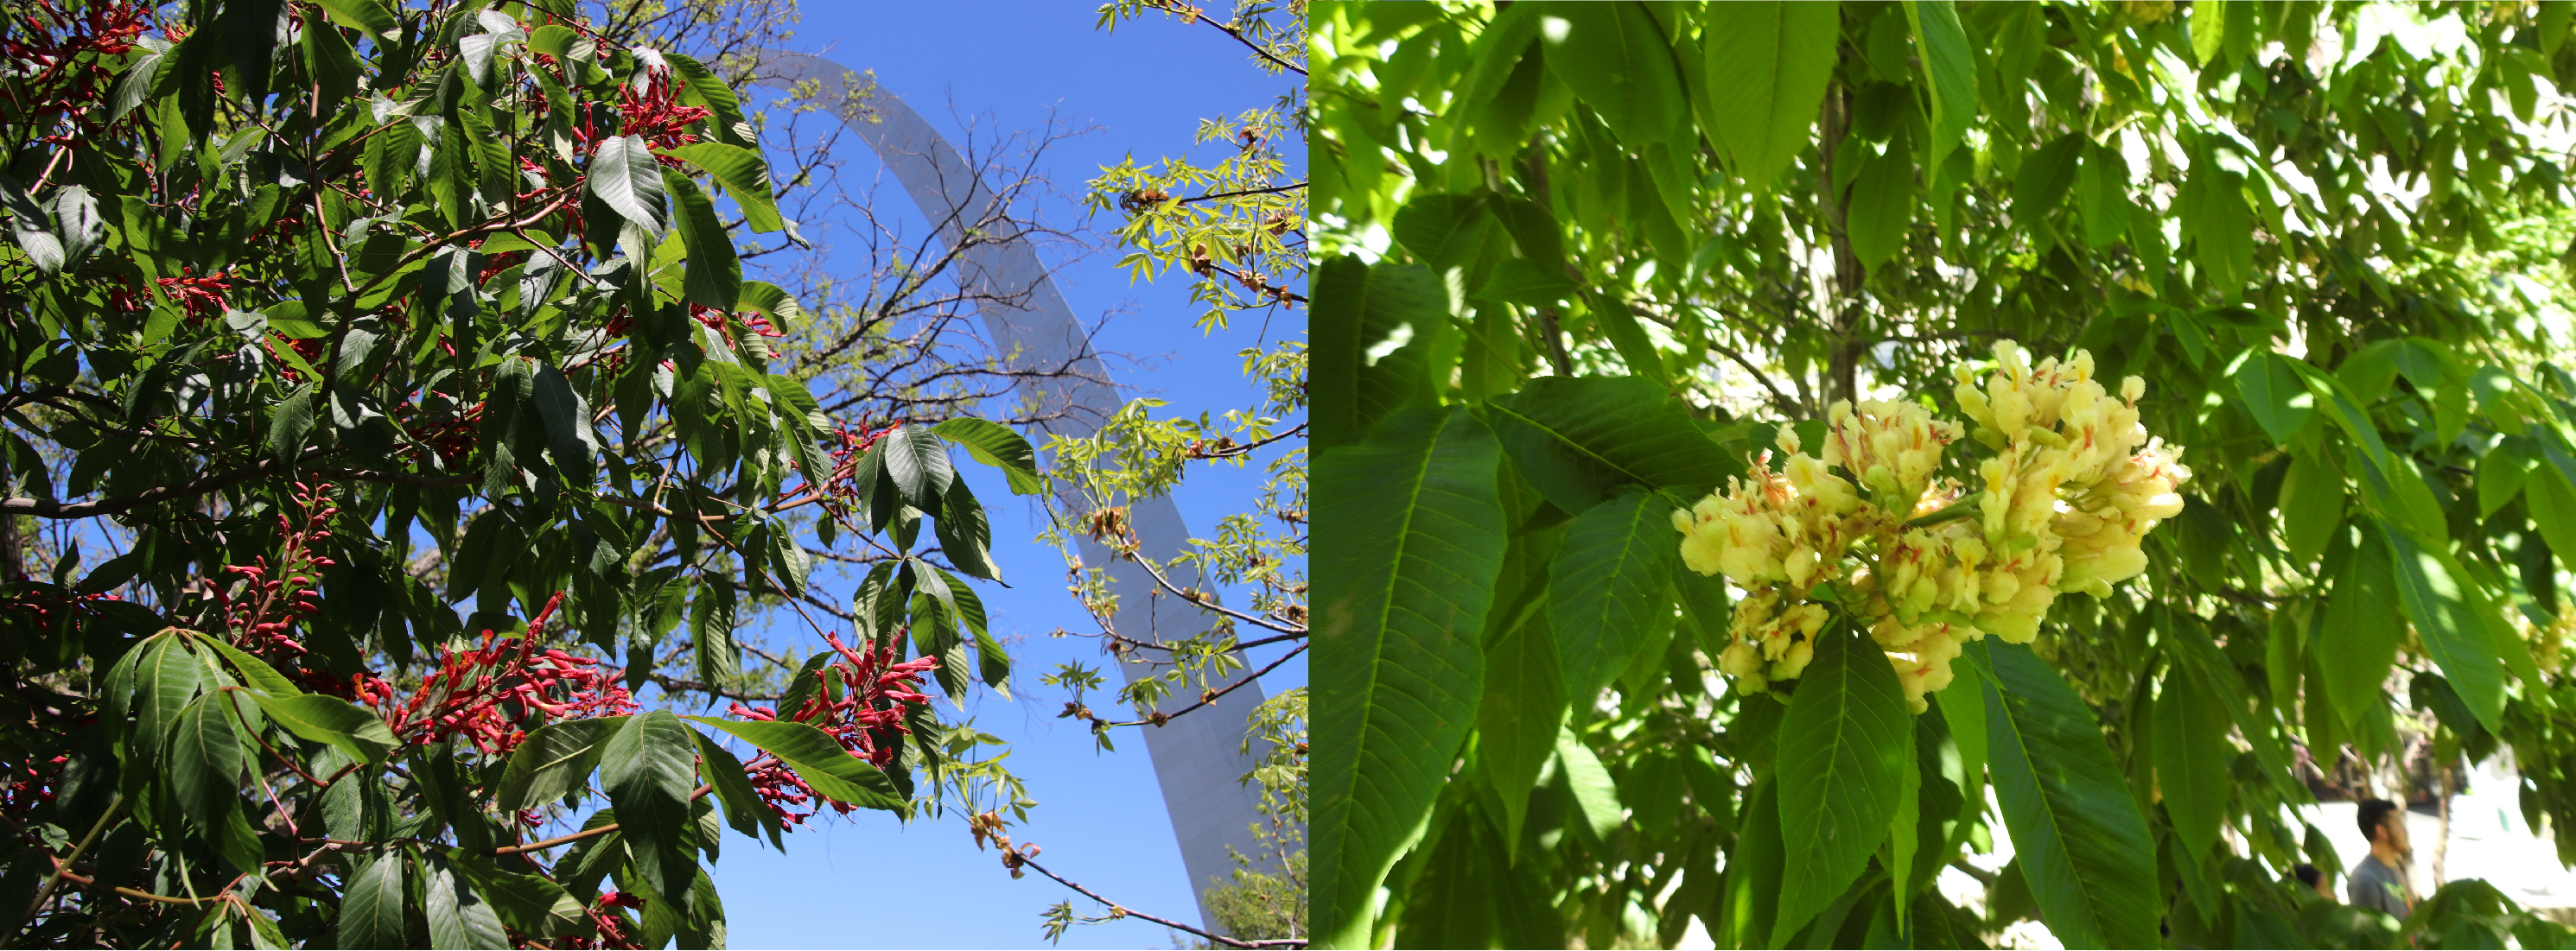 Two photos are displayed. The one on the left has a tropical-looking waxy red flower, the one on the right has a similarly shaped yellow flower.